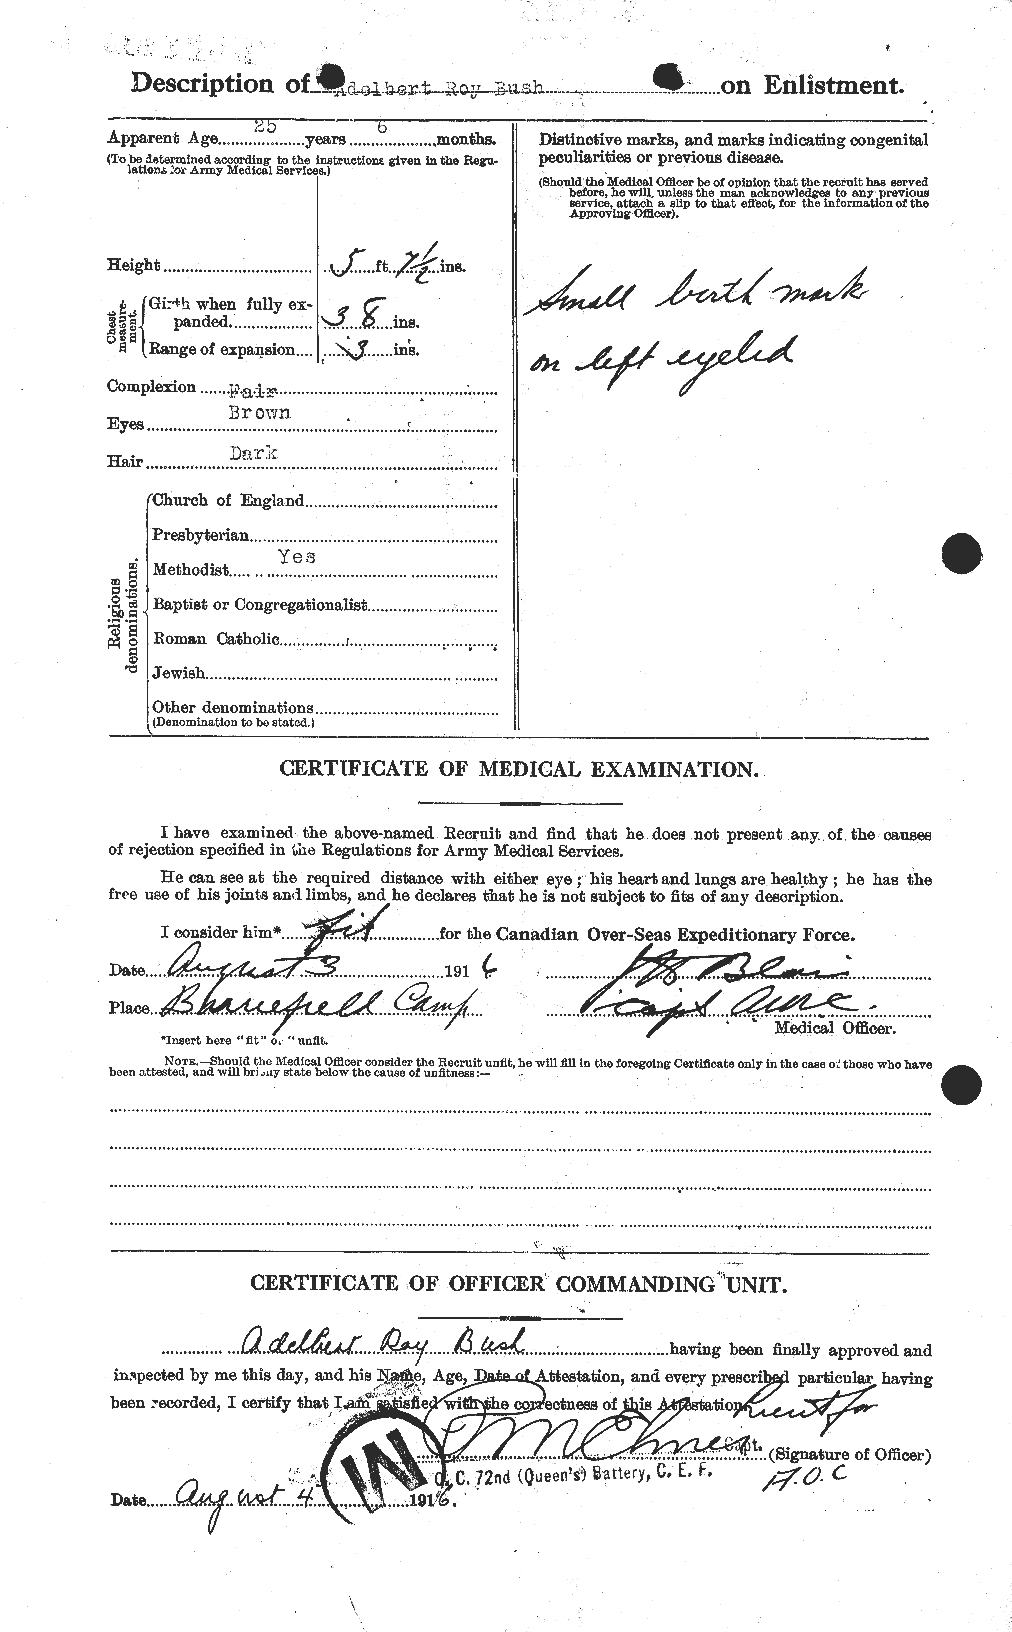 Personnel Records of the First World War - CEF 274321b